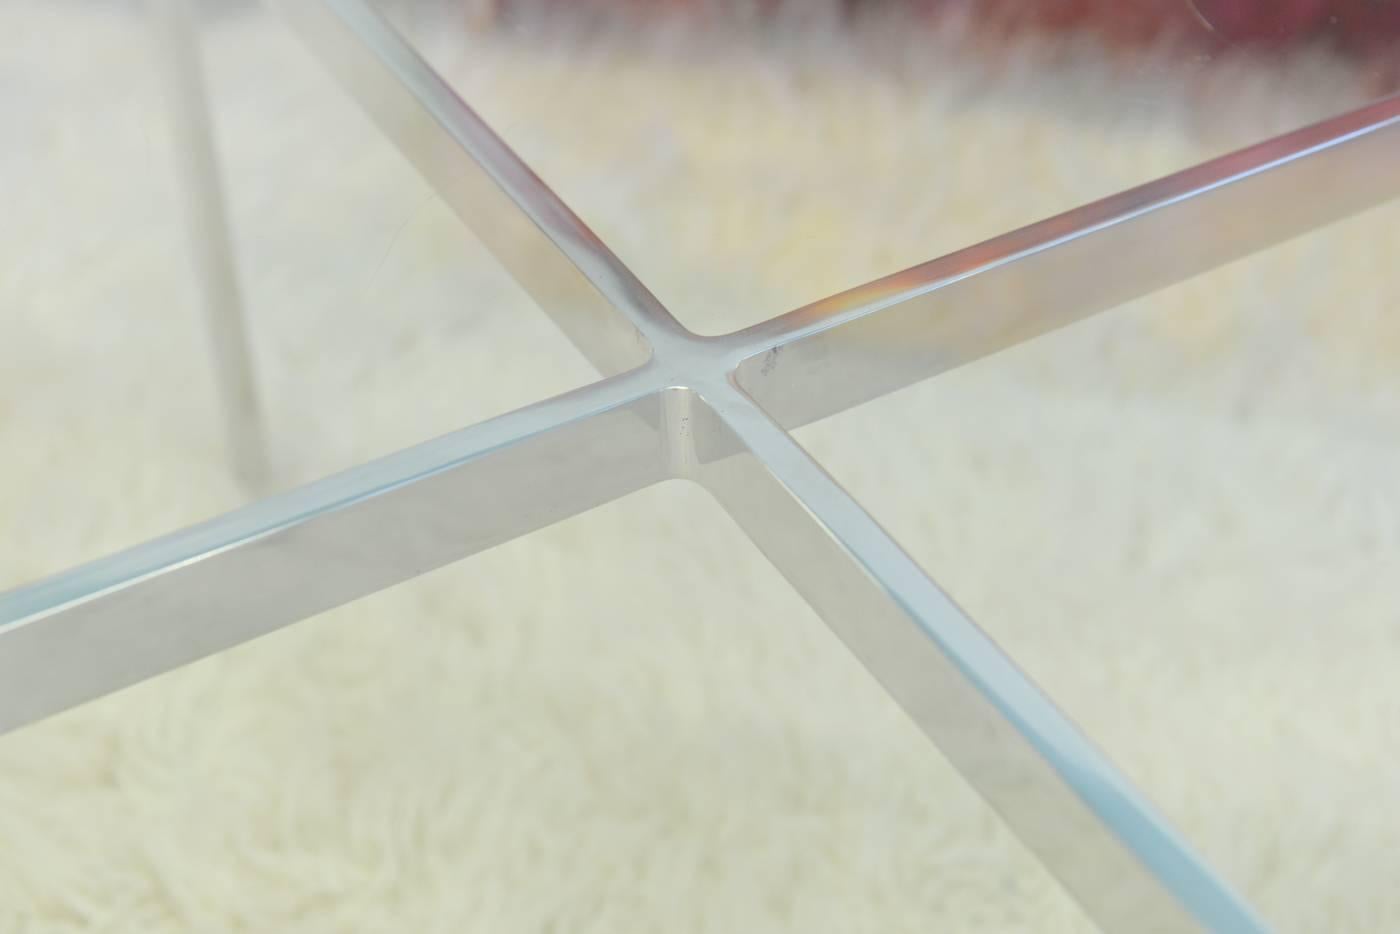 American Early Chrome and Glass Coffee Table by Mies Van Der Rohe for Knoll, circa 1968